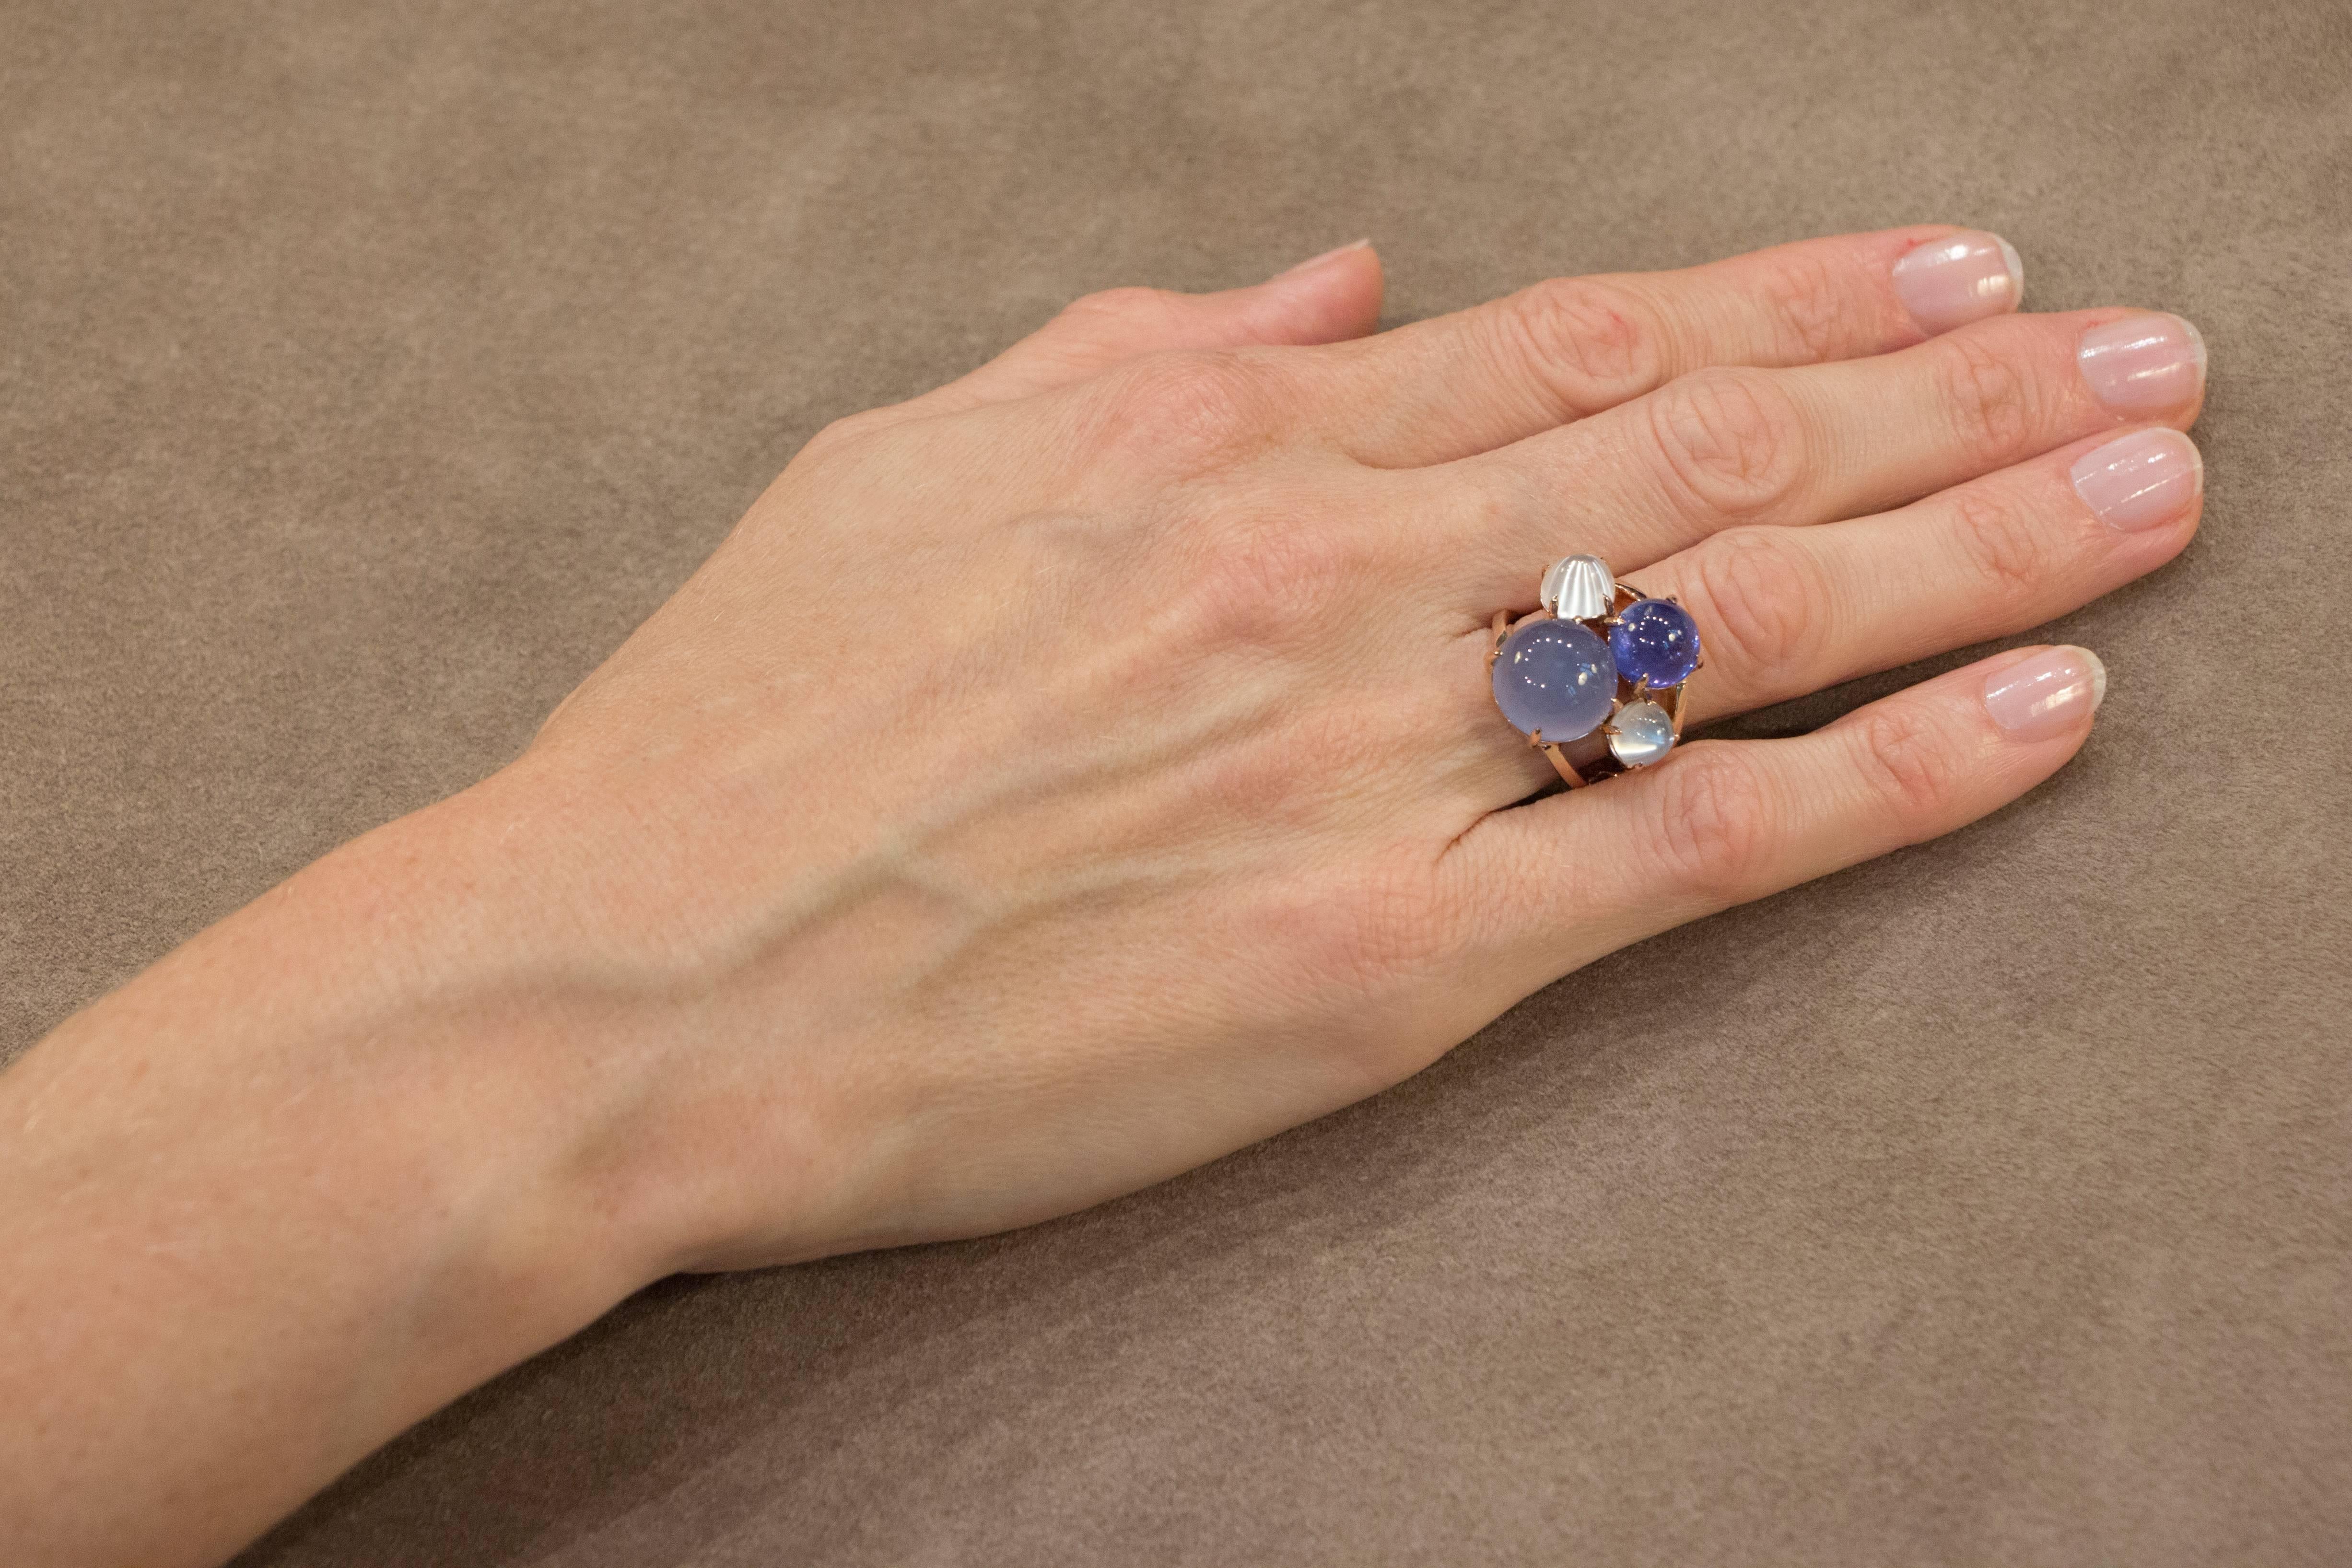 Jona design collection, hand crafted in Italy, 18 karat rose gold ring featuring 4.05 carats of Tanzanite, 6.95 carats of Chalcedony and 4.10 carats of Moonstone. Signed Jona. Us Ring size 6 /EU ring size 12.
Dimensions: 1.07 in. H x 0.85 in. W x